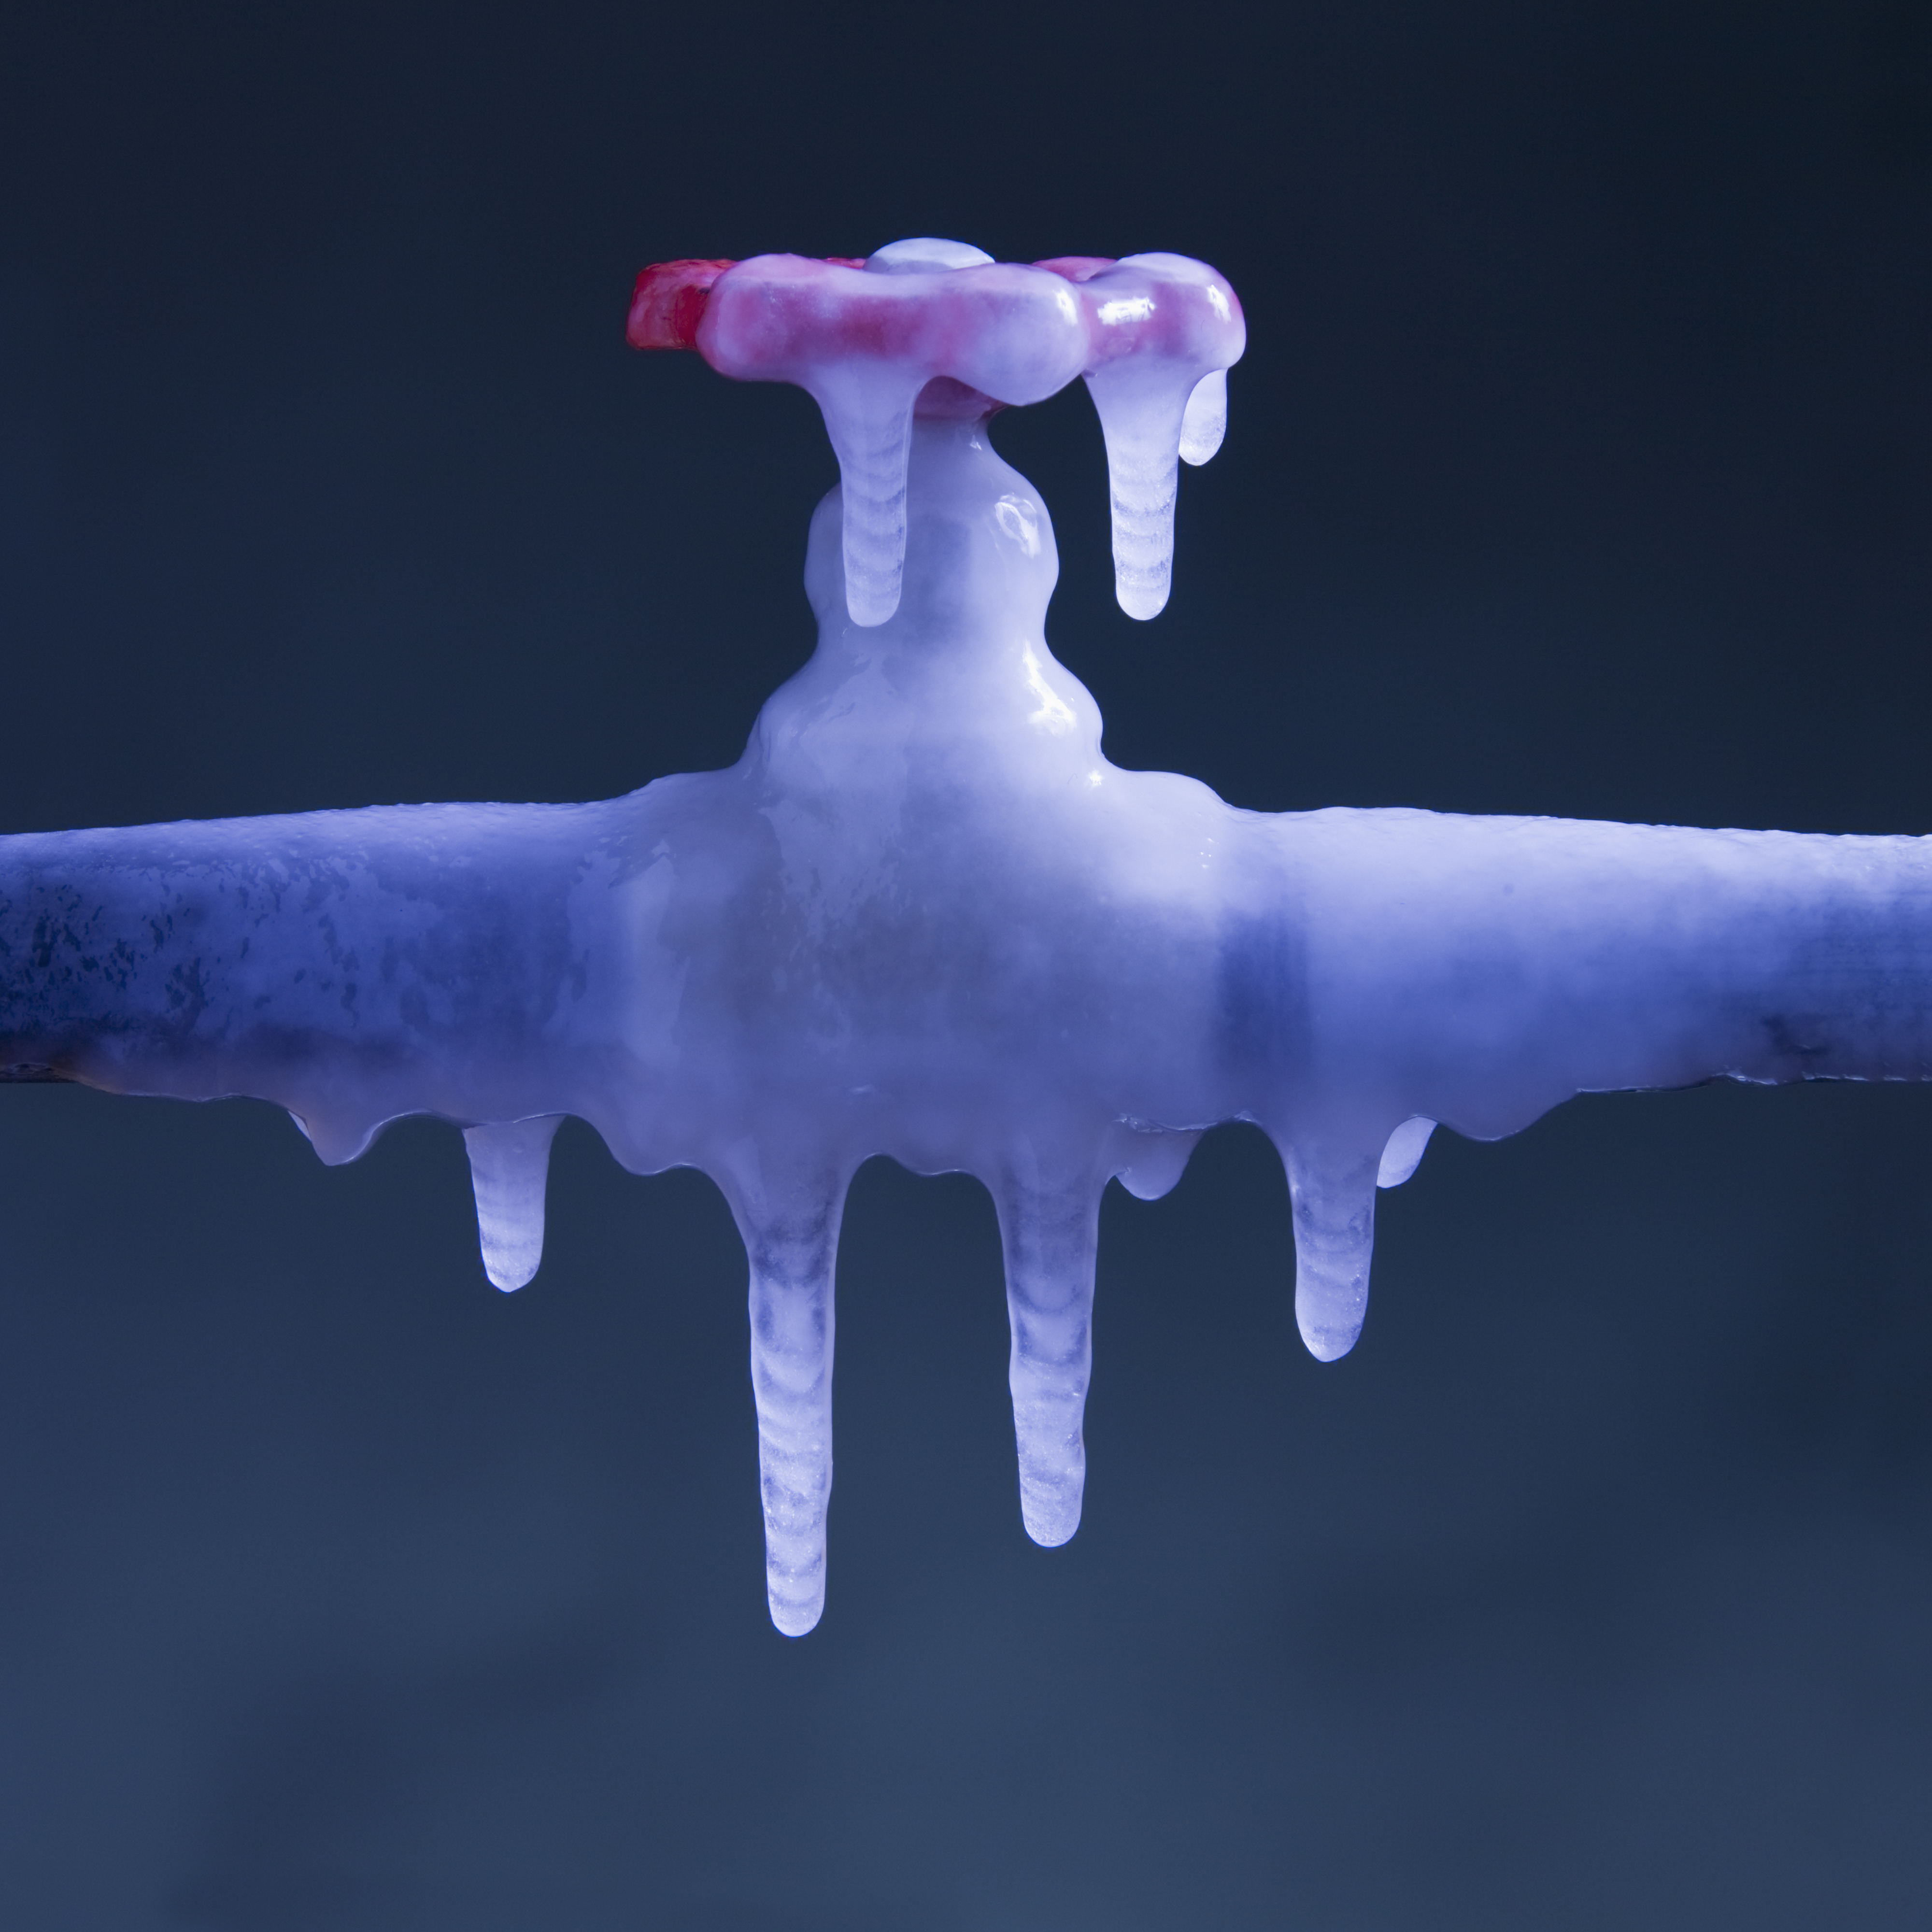 A frozen faucet with icicles hanging, depicting extreme cold affecting plumbing